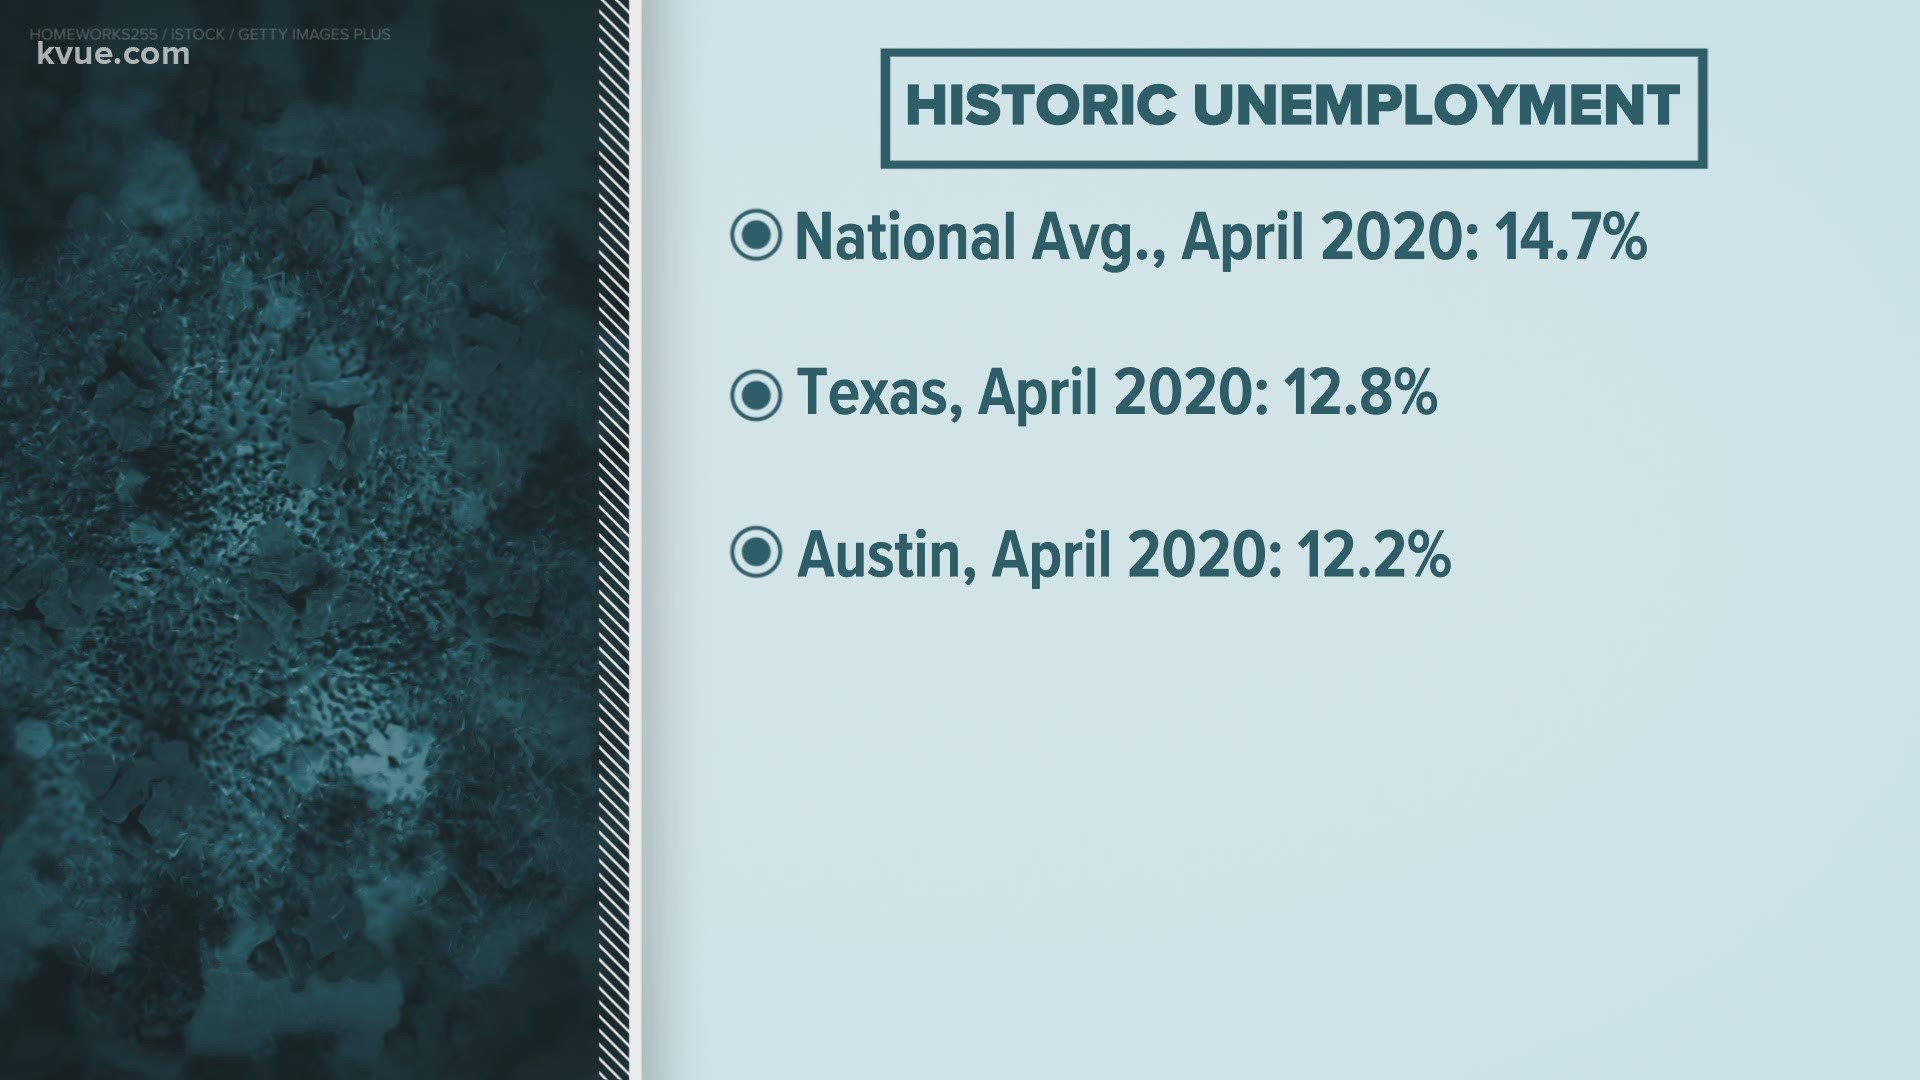 Unemployment in Texas is rising to record levels as the COVID-19 pandemic shut down much of the state's economy.